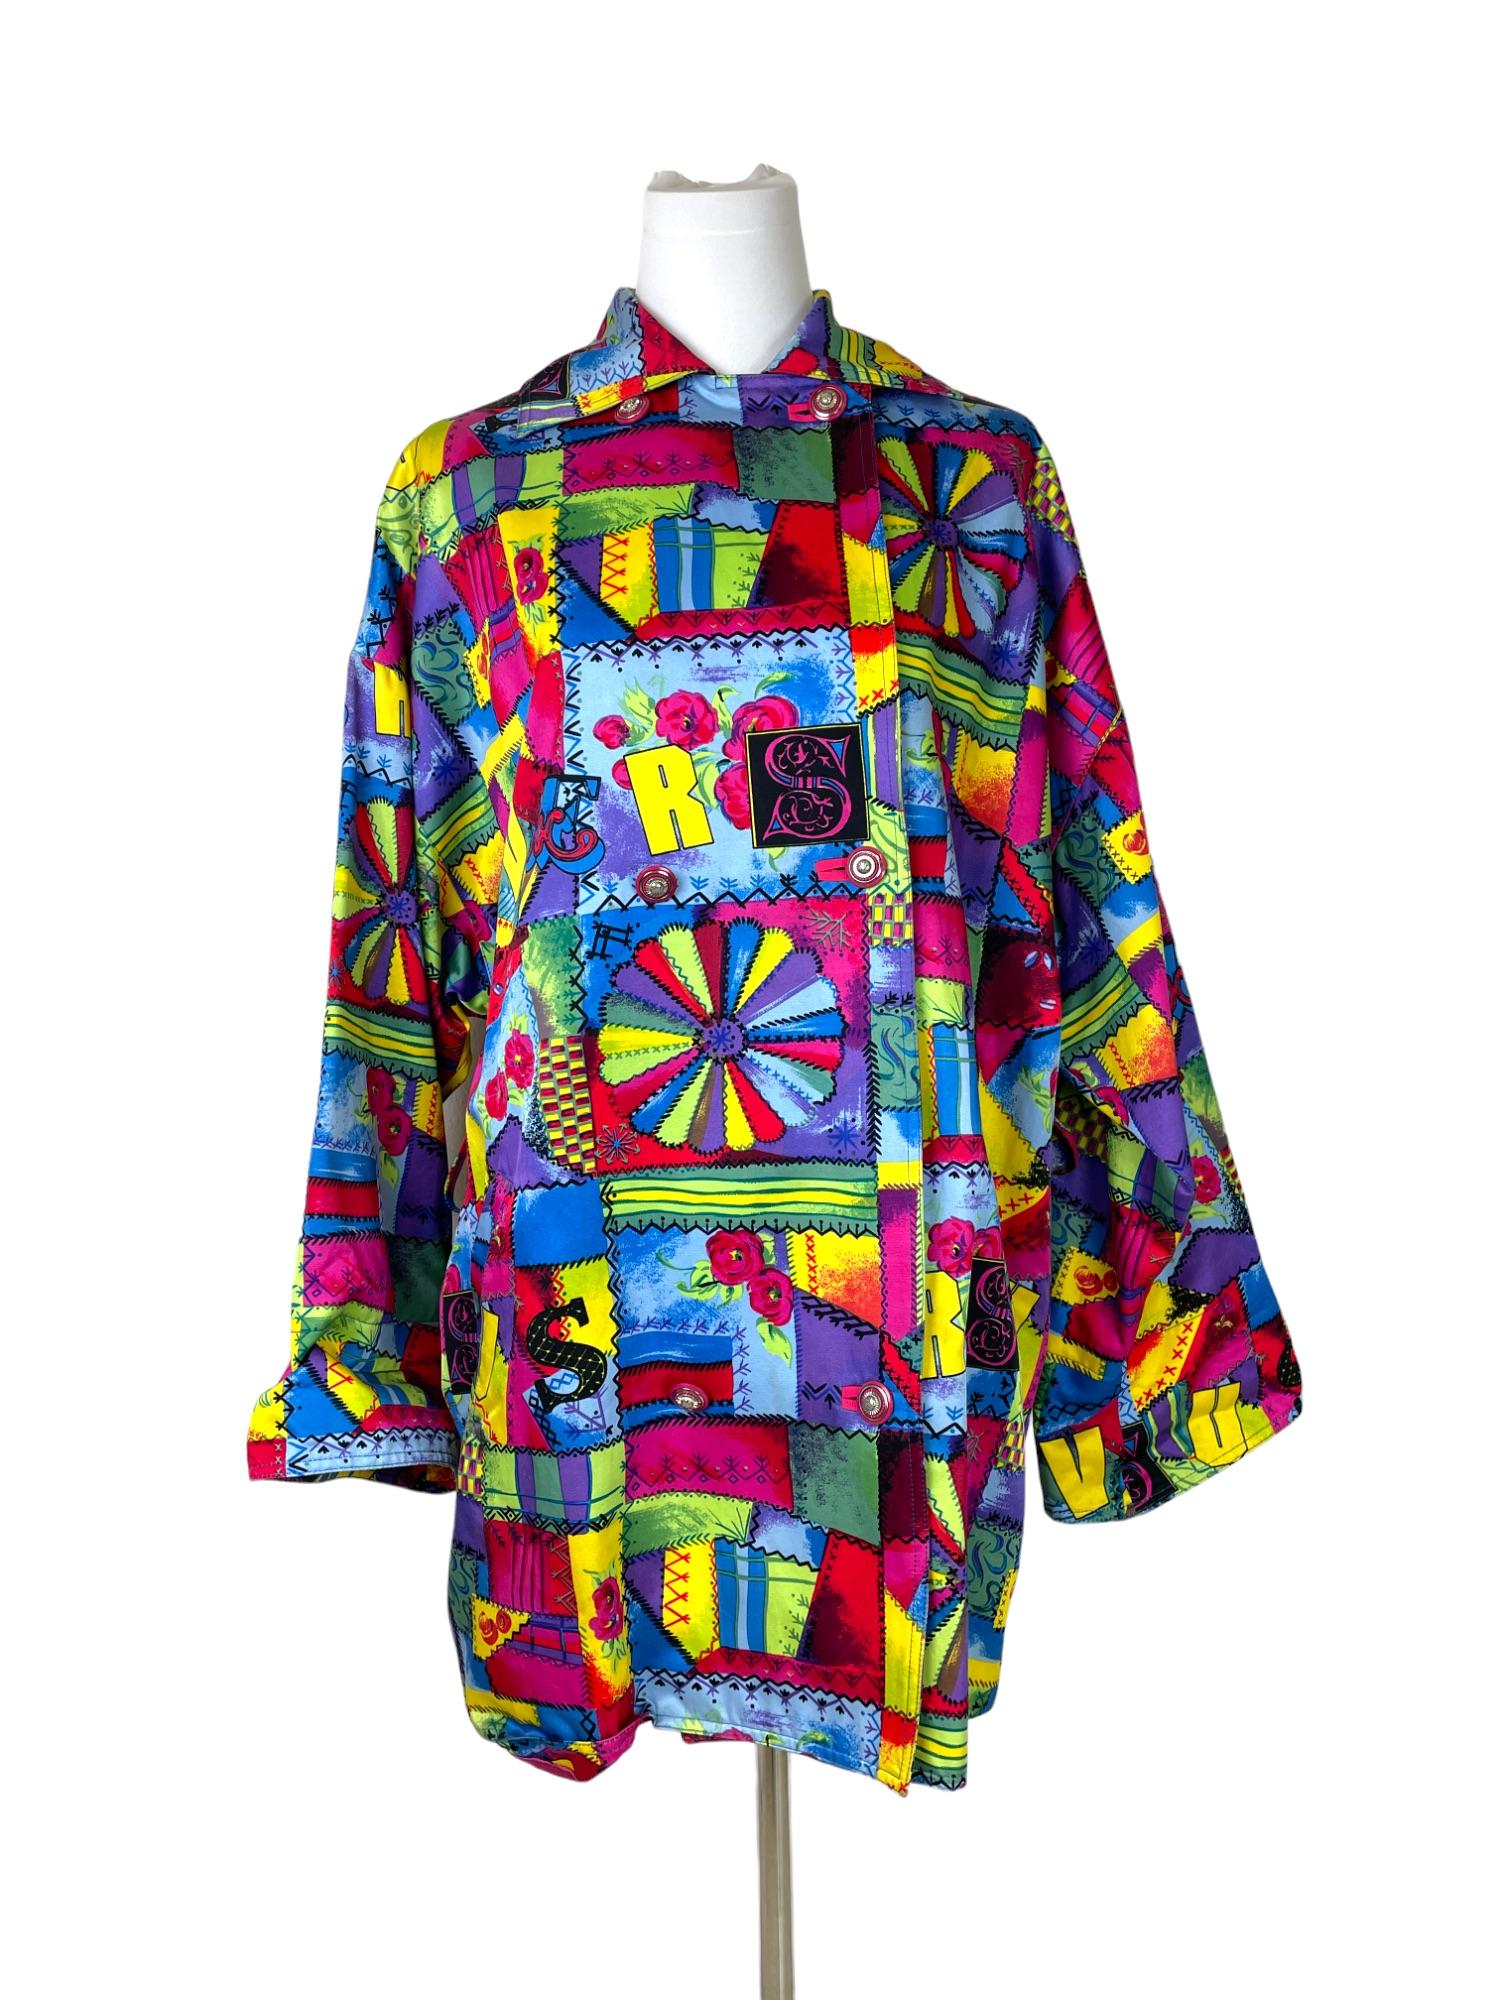 Rare Versus by Gianni Versace Multicolor Printed Trench 1990s
Six buttons 
Two pockets
SIZE: 28 / 42 (IT 42)
-
Fabrics and productions label were cut.
-
Total length: 80cm
Shoulders: 63cm
Width: 63cm
-
NO RETURNS